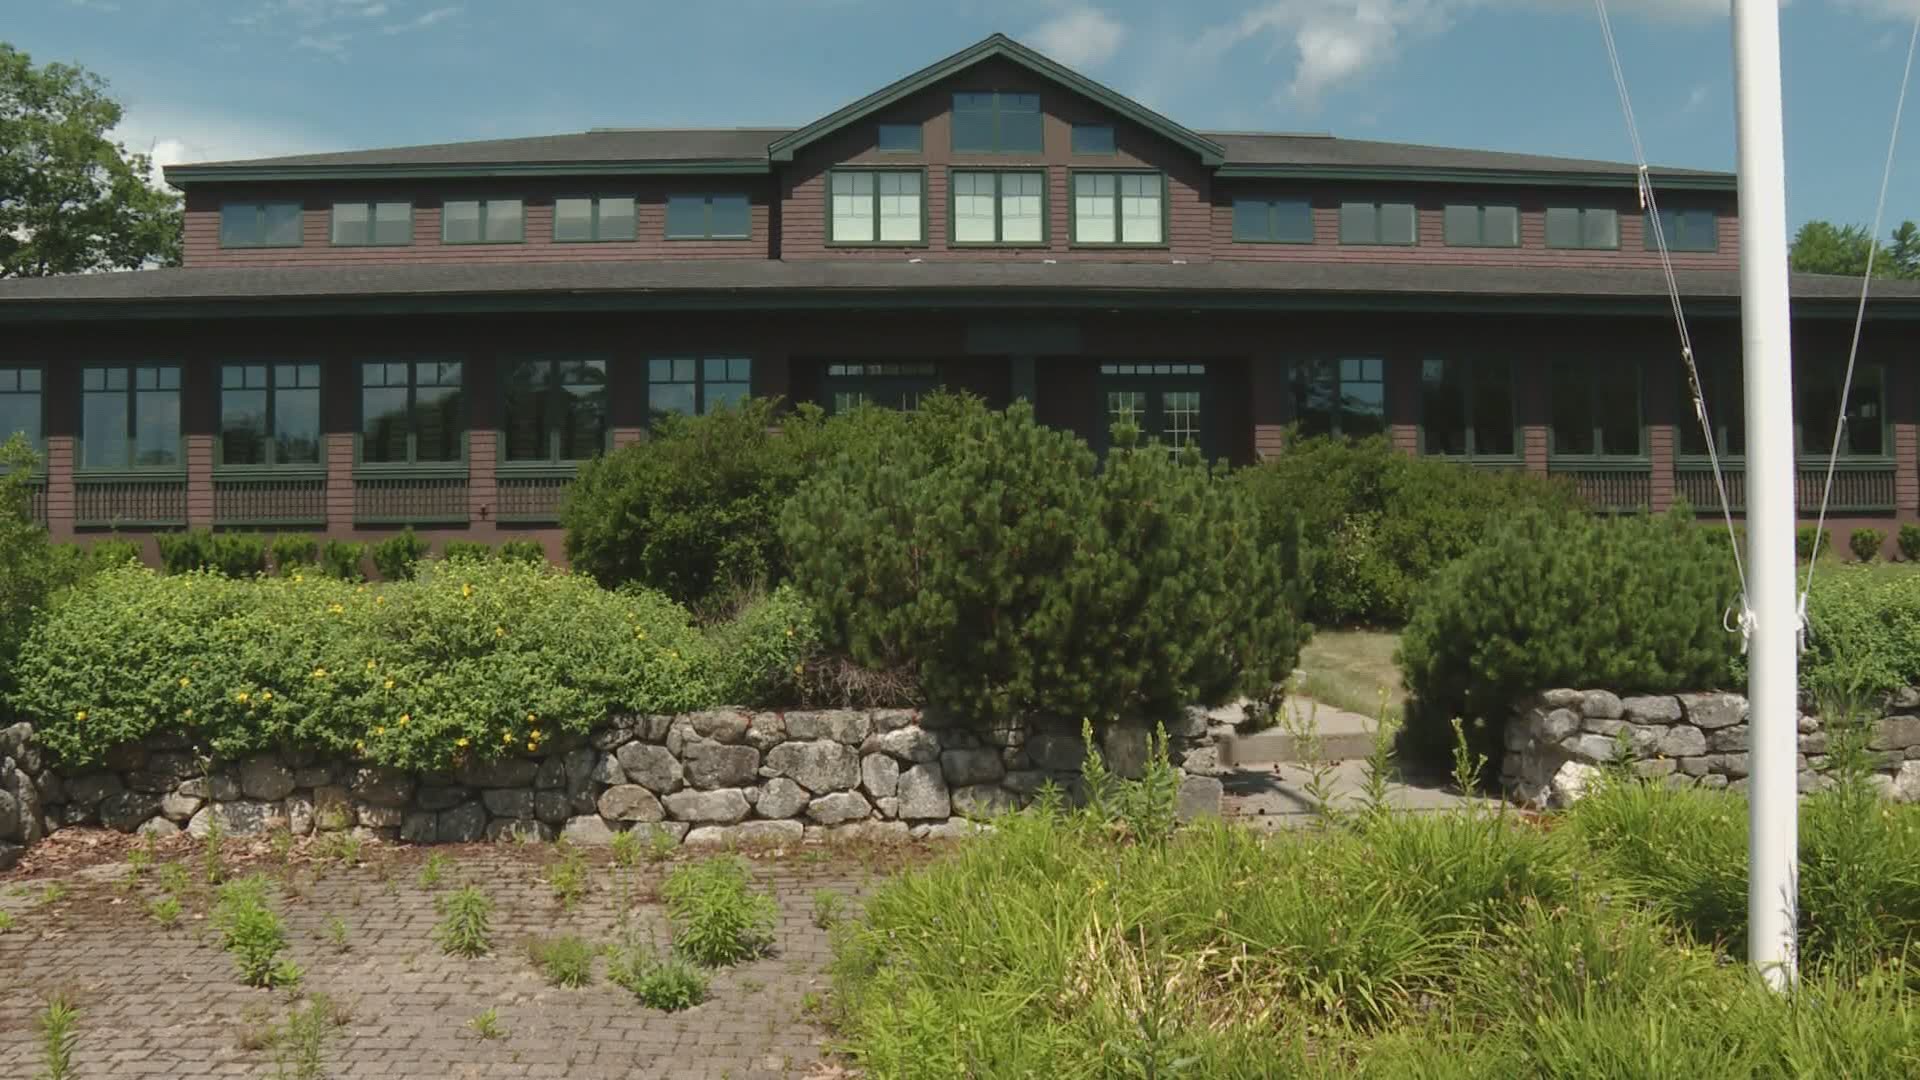 Point Lookout resort is being auctioned off